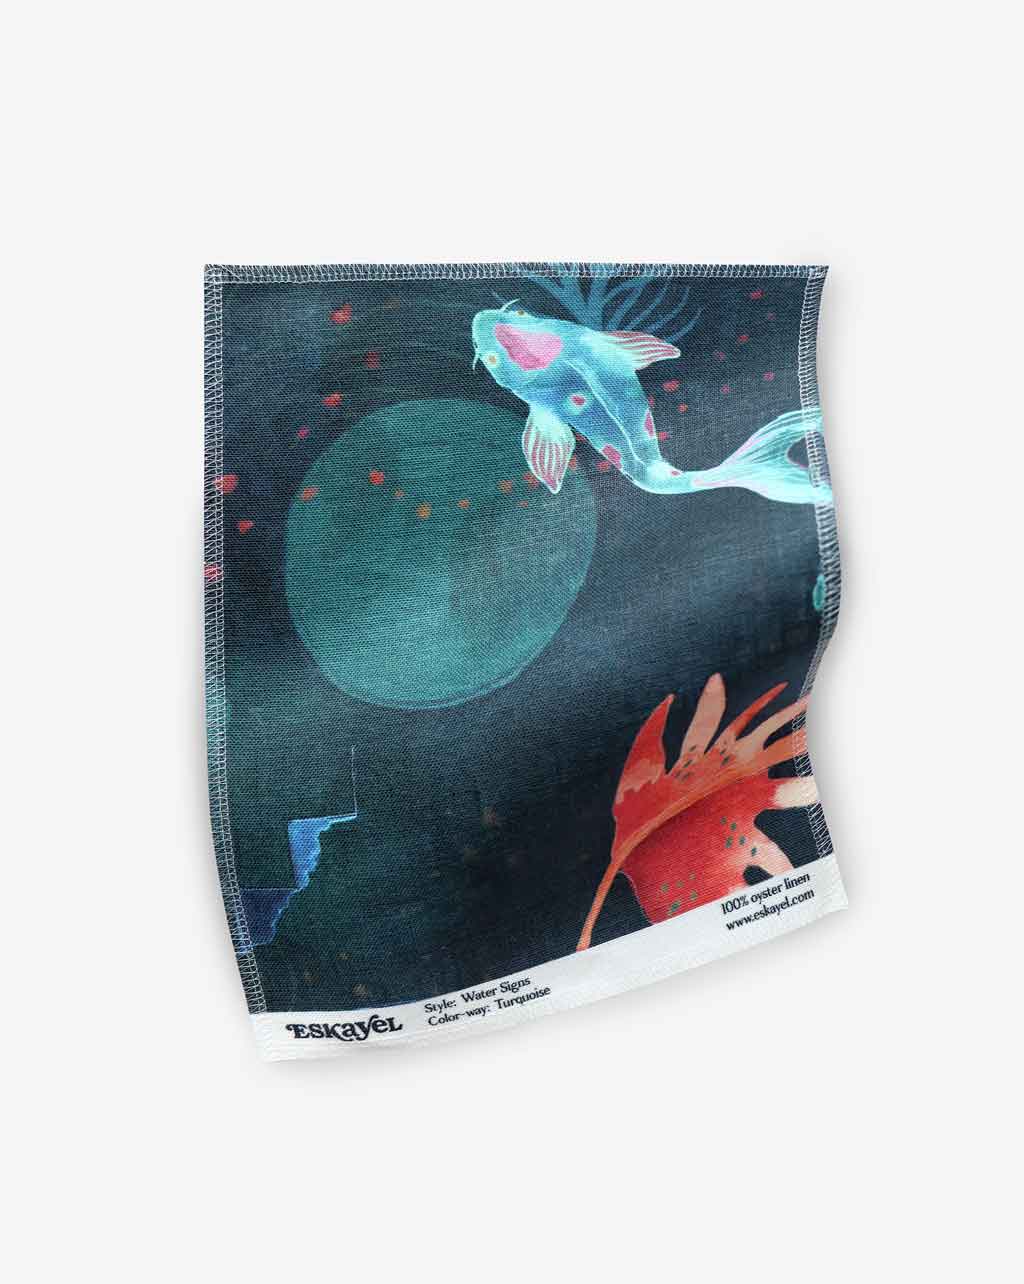 A Water Signs Fabric Sample Turquoise with an image of a koi fish in the ocean